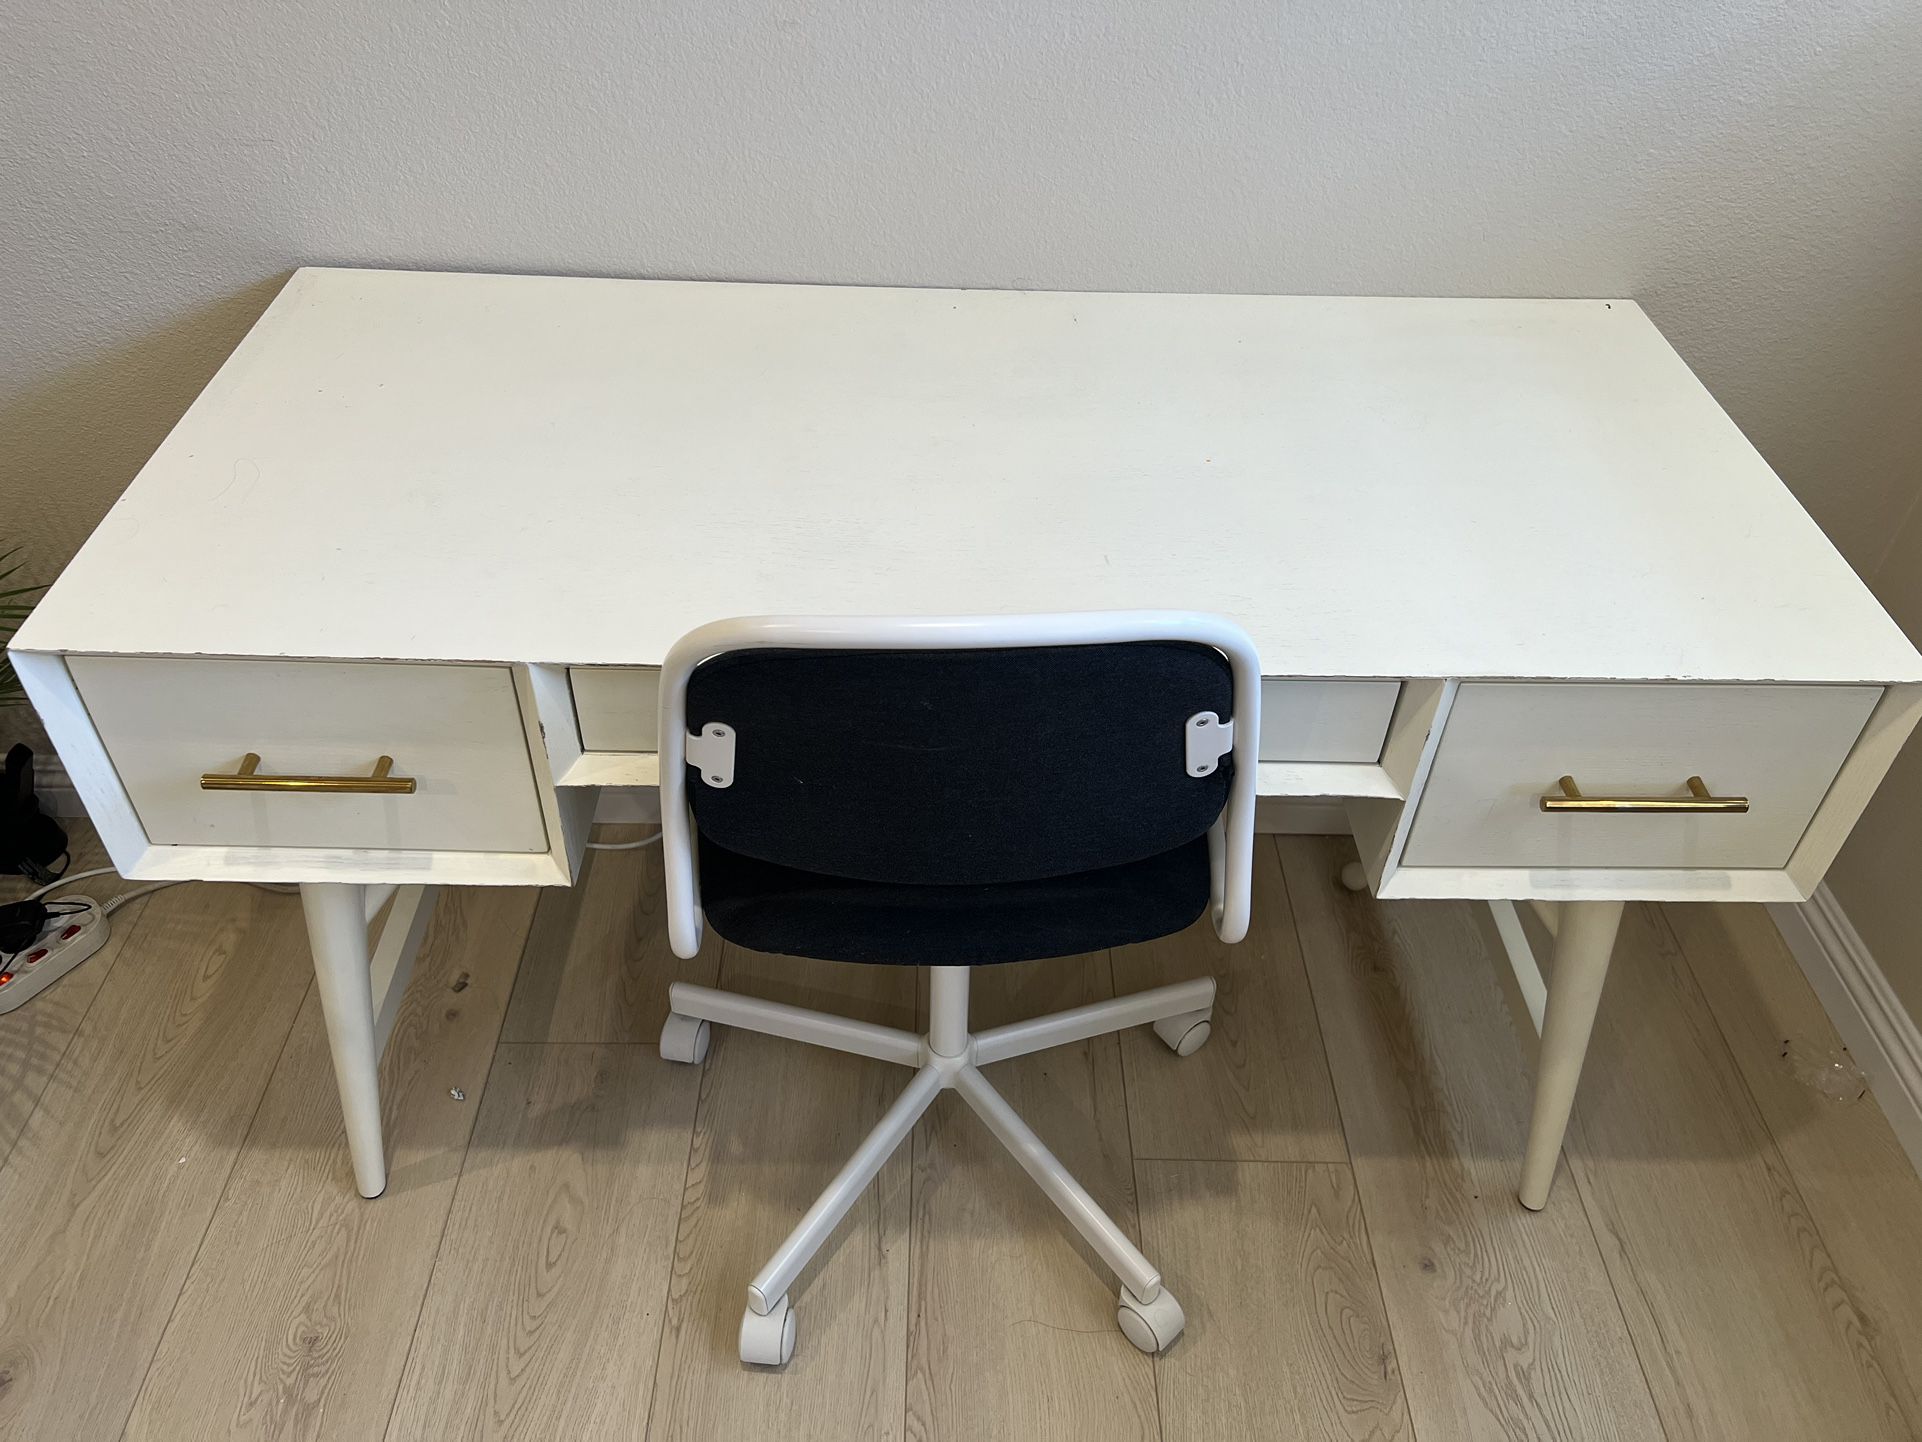 Real Wood White Desk with gold knob + chair